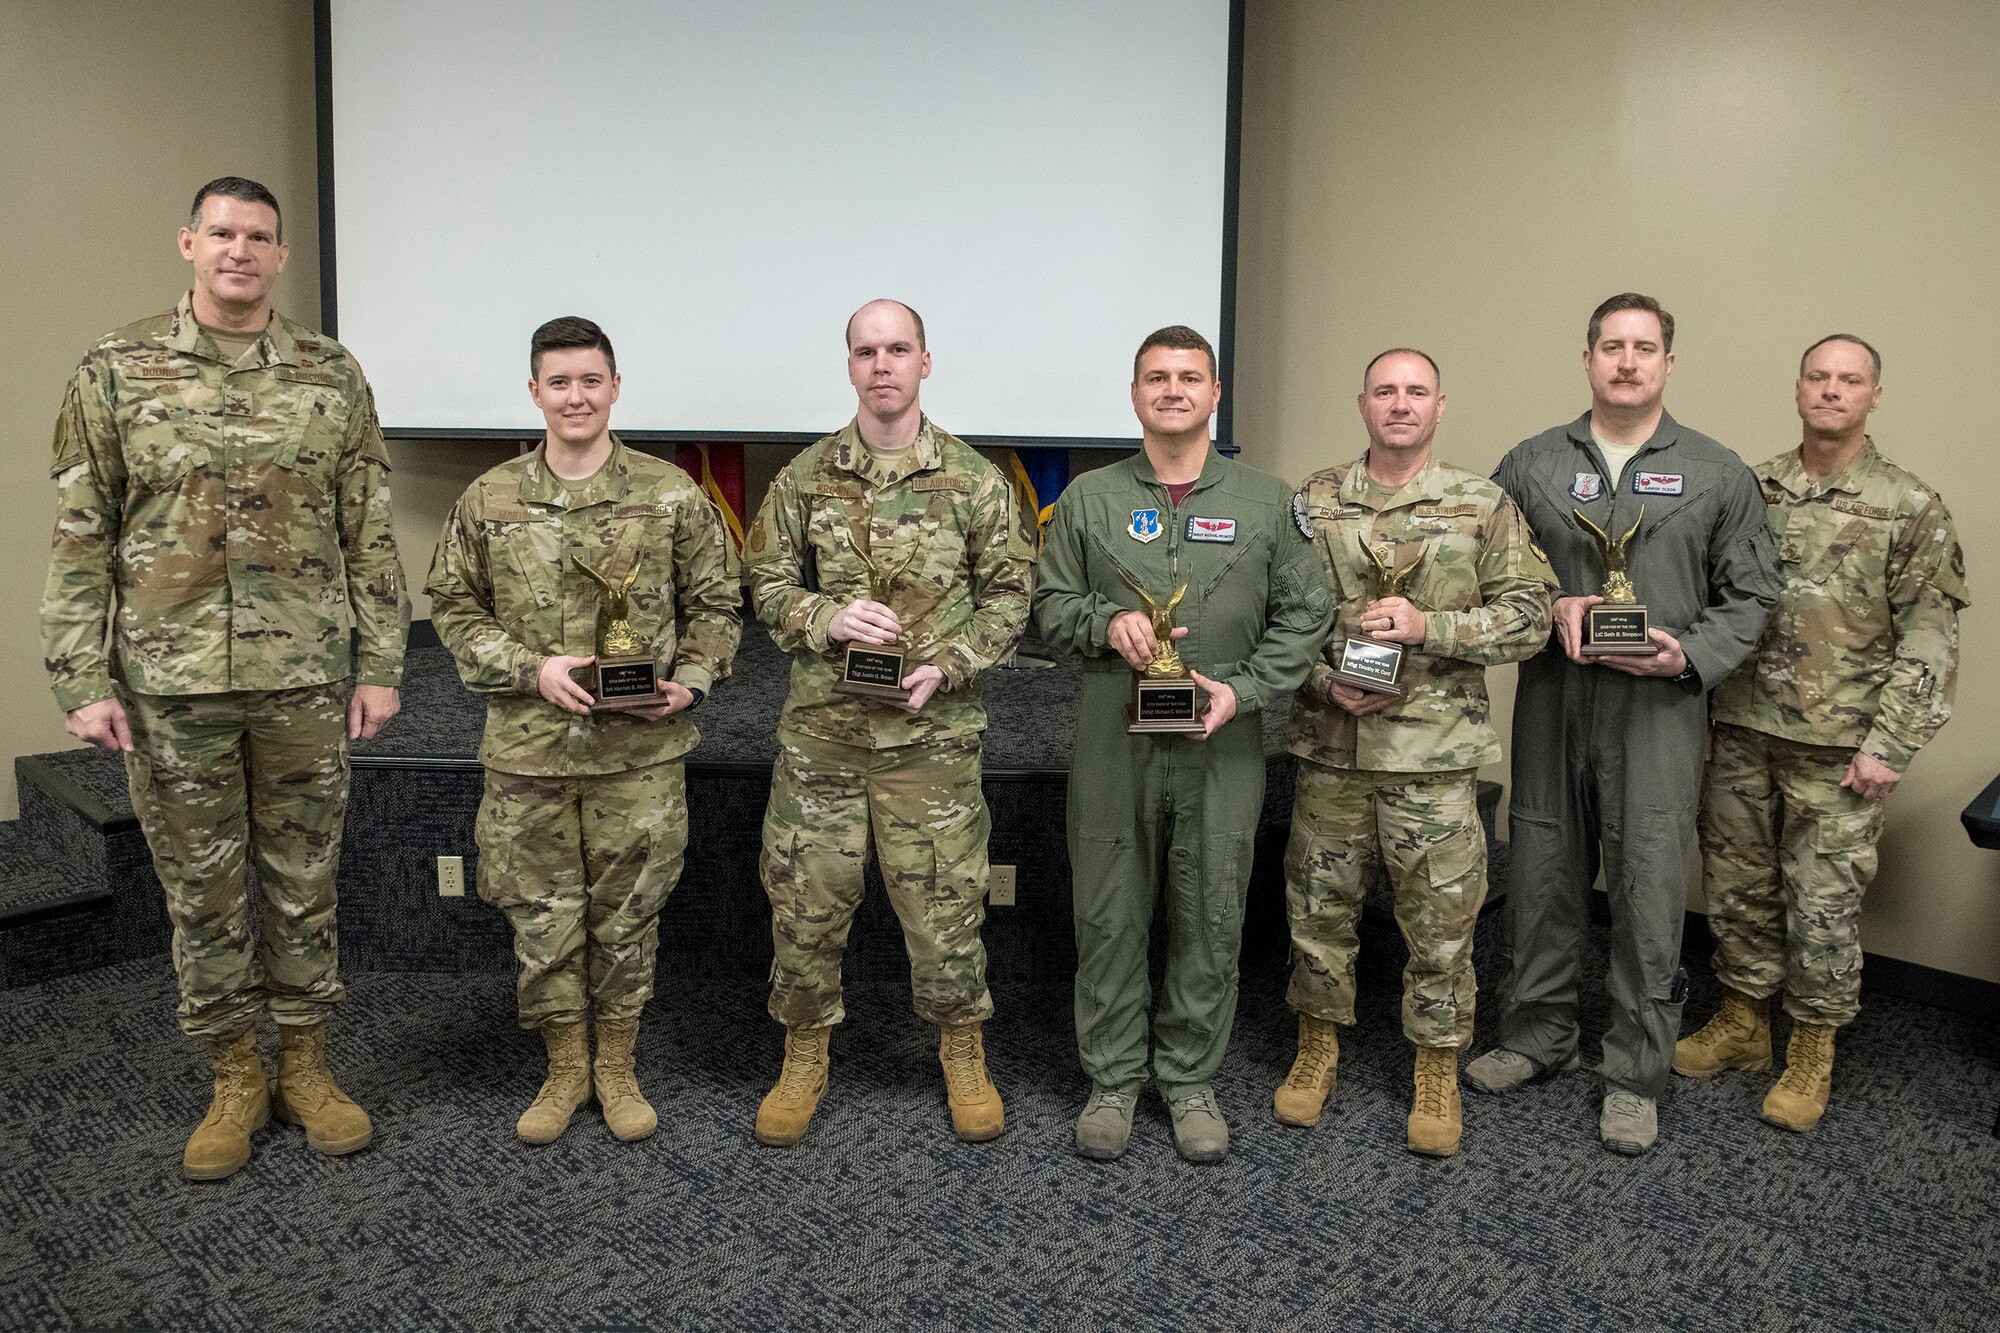 The 188th Wing’s Outstanding Airmen of the Year pose for a photo with wing leadership during a recognition ceremony at Ebbing Air National Guard Base, Ark., Jan 11, 2020. From left, Col. Leon Dodroe, 188th Wing commander, Senior Airman Hannah Martin, Outstanding Junior Enlisted Airman of the Year, Tech. Sgt. Justin Brown, Outstanding NCO of the Year; Senior Master Sgt. Michael Wilmouth, Outstanding Senior NCO of the Year; Master Sgt. Timothy Curd, Outstanding First Sergeant of the Year; Lt. Col. Douglas Olson, 188th Operations Group Director of Operations, accepting on behalf of Maj. Seth Simpson, Outstanding Field Grade Officer of the Year; Chief Master Sgt. Donnie Frederick, 188th Wing Command Chief Master Sergeant. Not pictured is Capt. Logan Huffman, Outstanding Company Grade Officer of the Year. (U.S. Air National Guard photo by Airman 1st Class Christopher Sherlock)